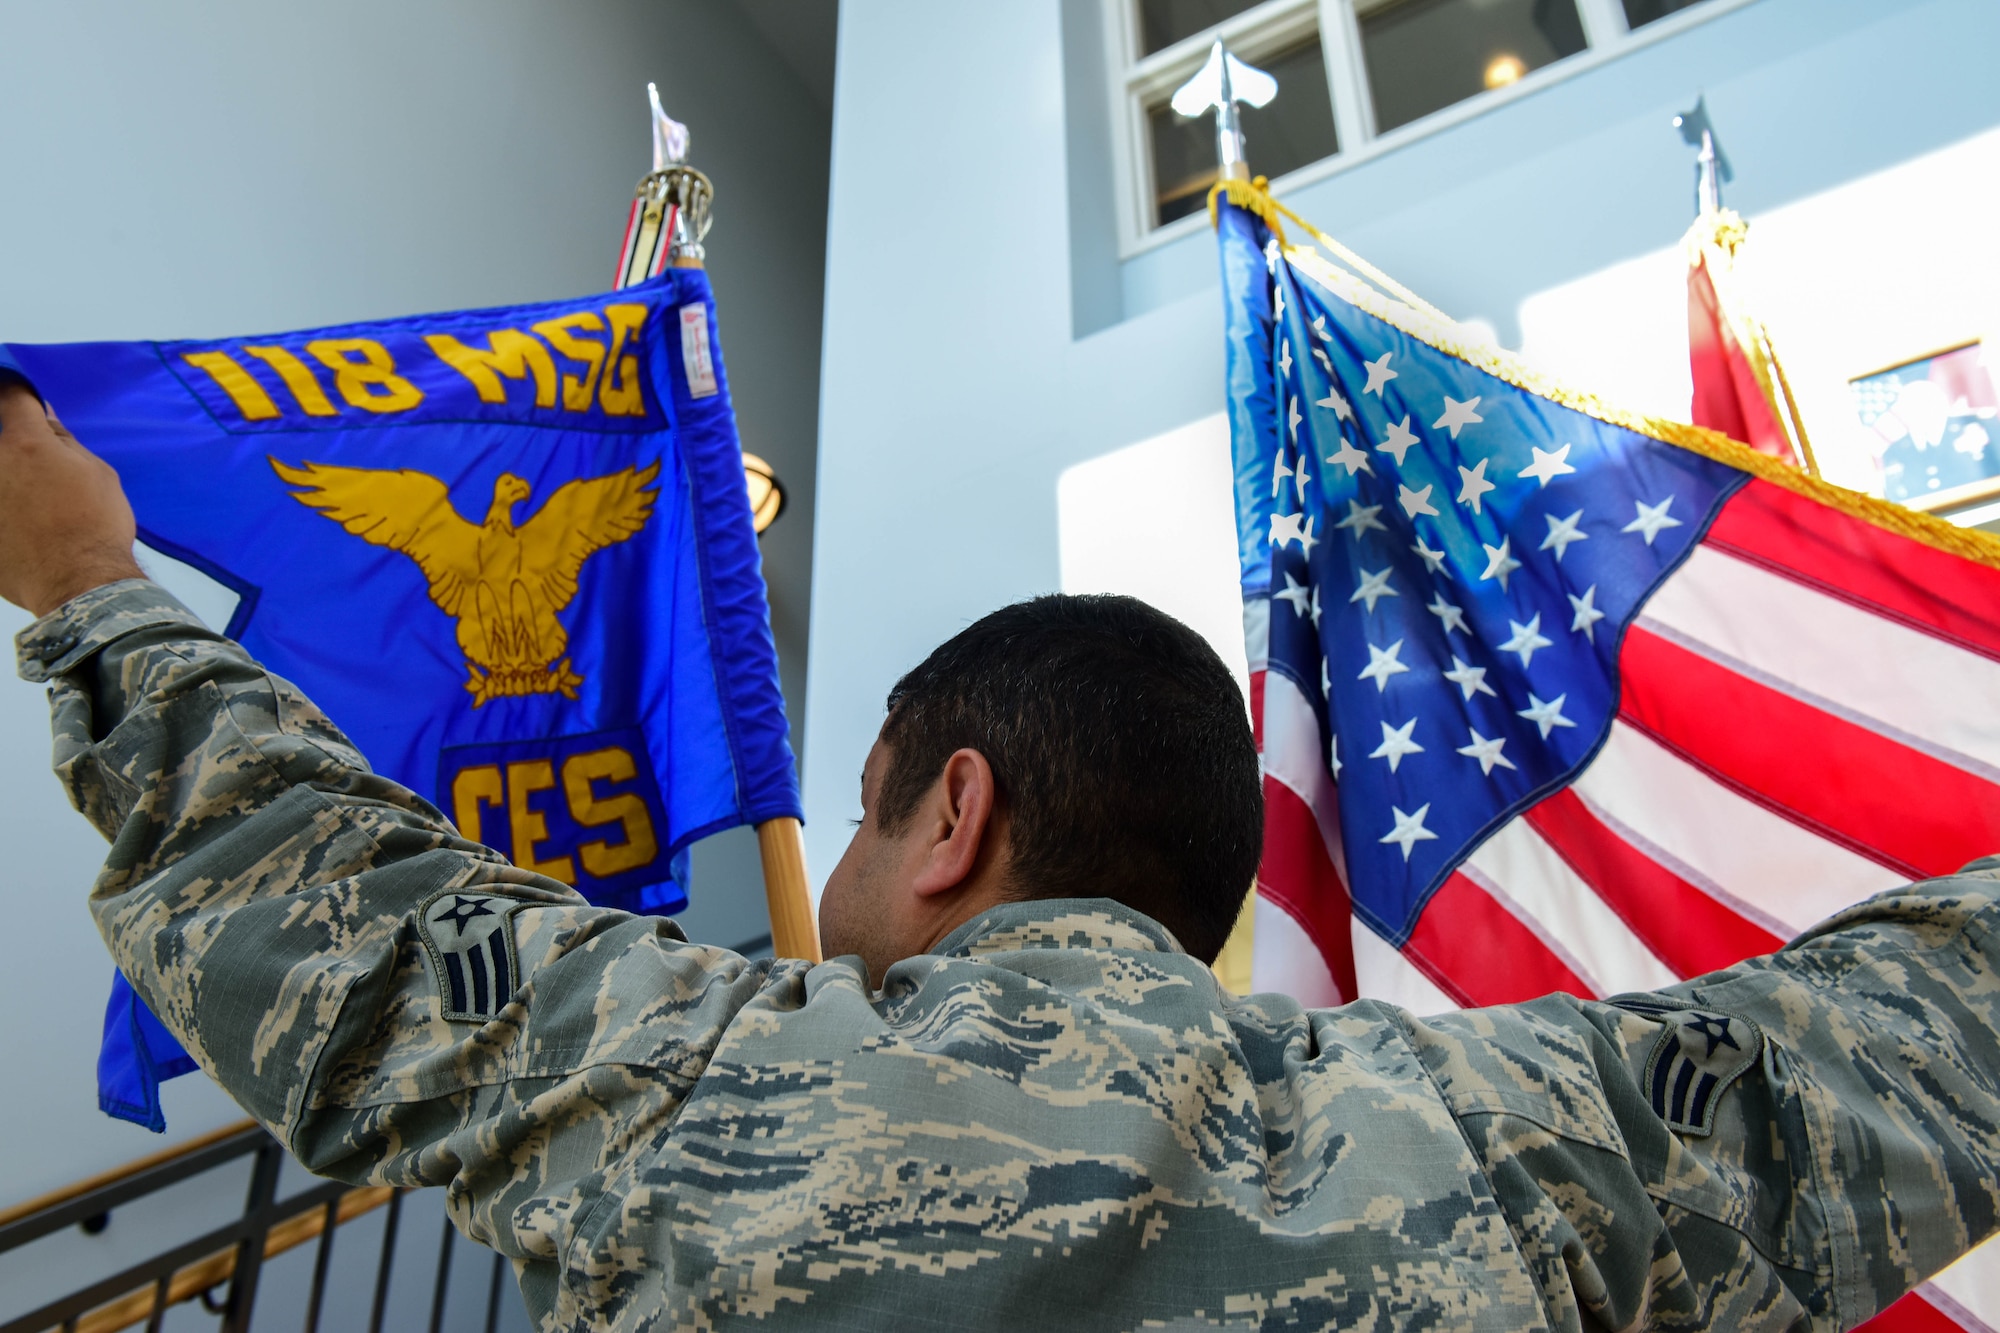 Senior Airman Mohammed Alzubaidi, an electrical systems specialist with the 118th Civil Engineer Squadron, poses with the flags of the United States and his unit on Sept. 27, 2017 at Berry Field Air National Guard Base in Nashville, Tennessee.